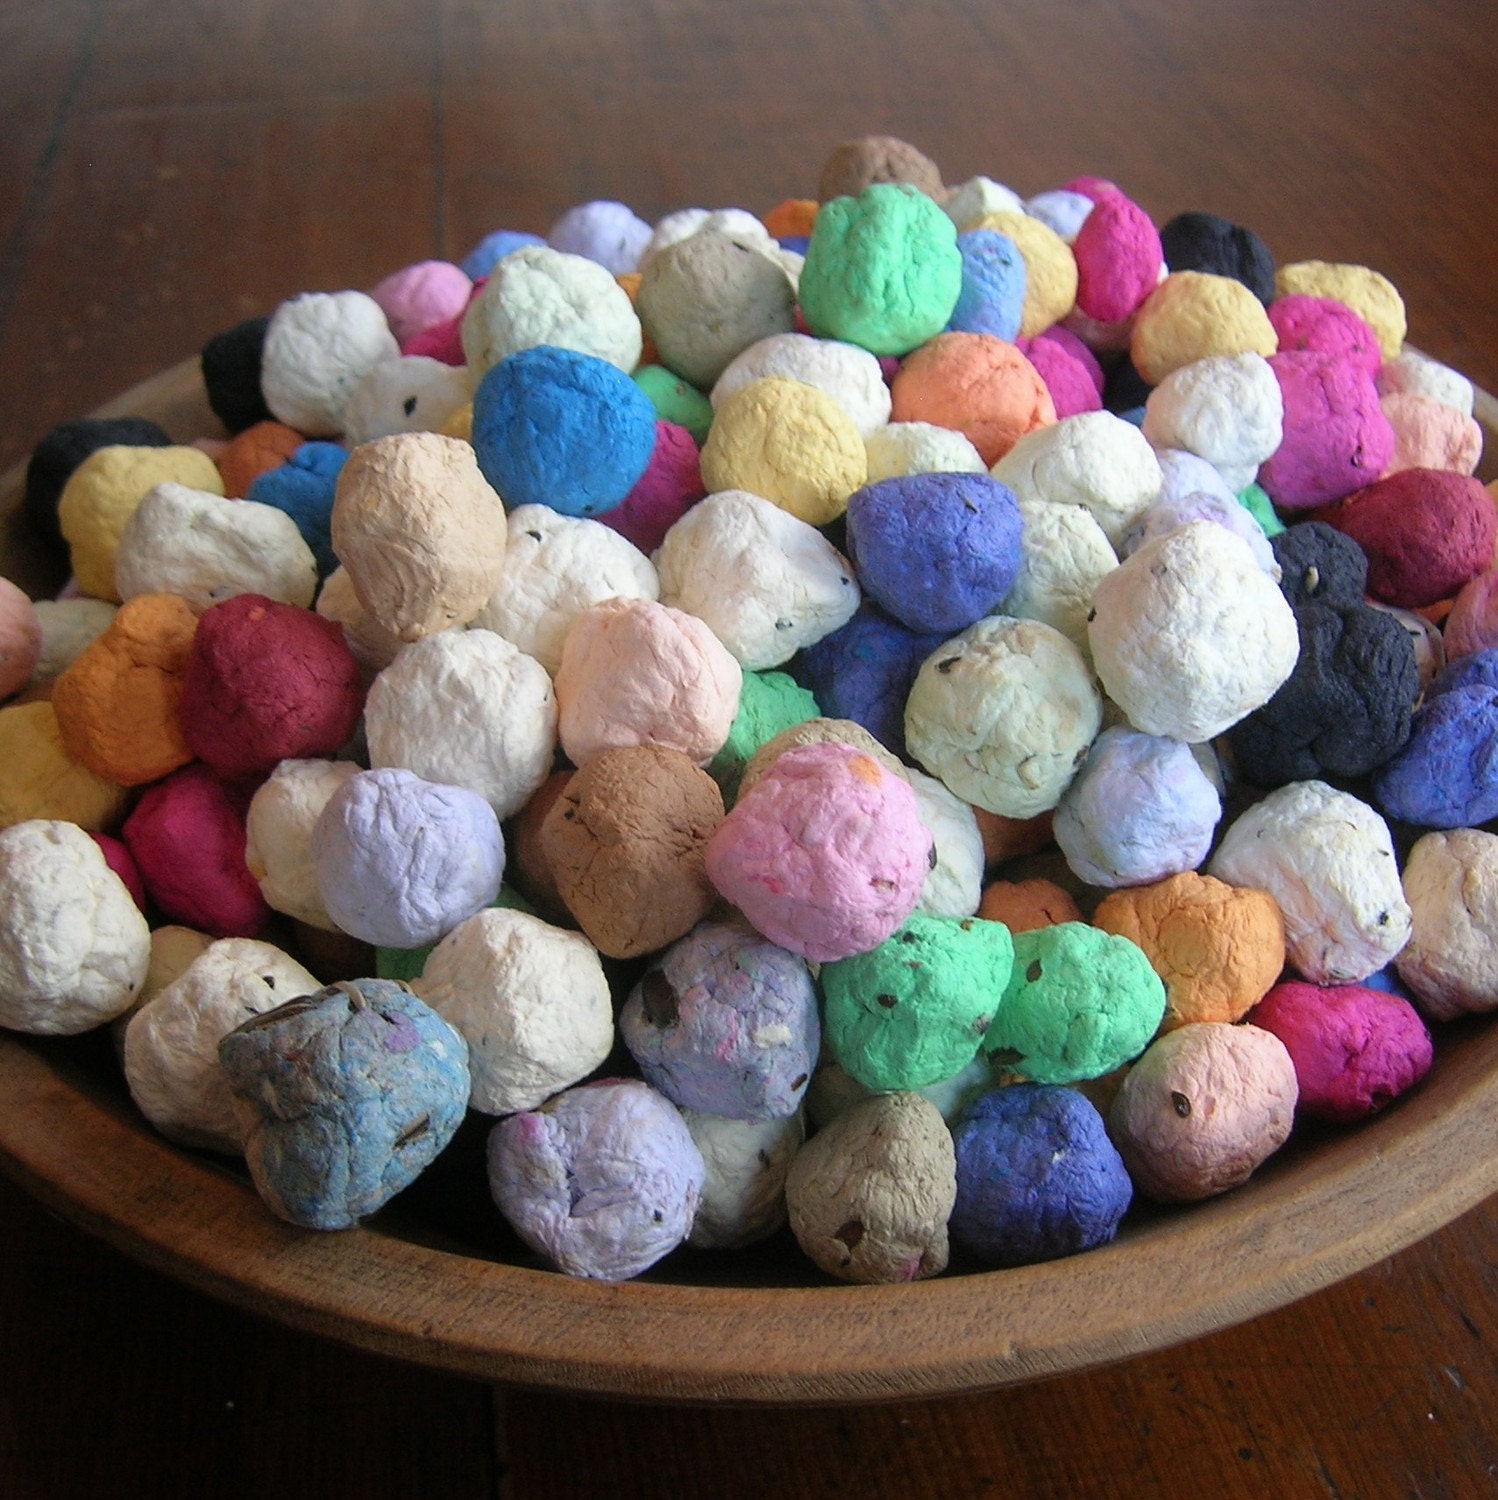 DEPOSIT on CUSTOM order of Seed Bombs for your special event favors - colorful balls of handmade paper embedded with perennial and annual flower seeds